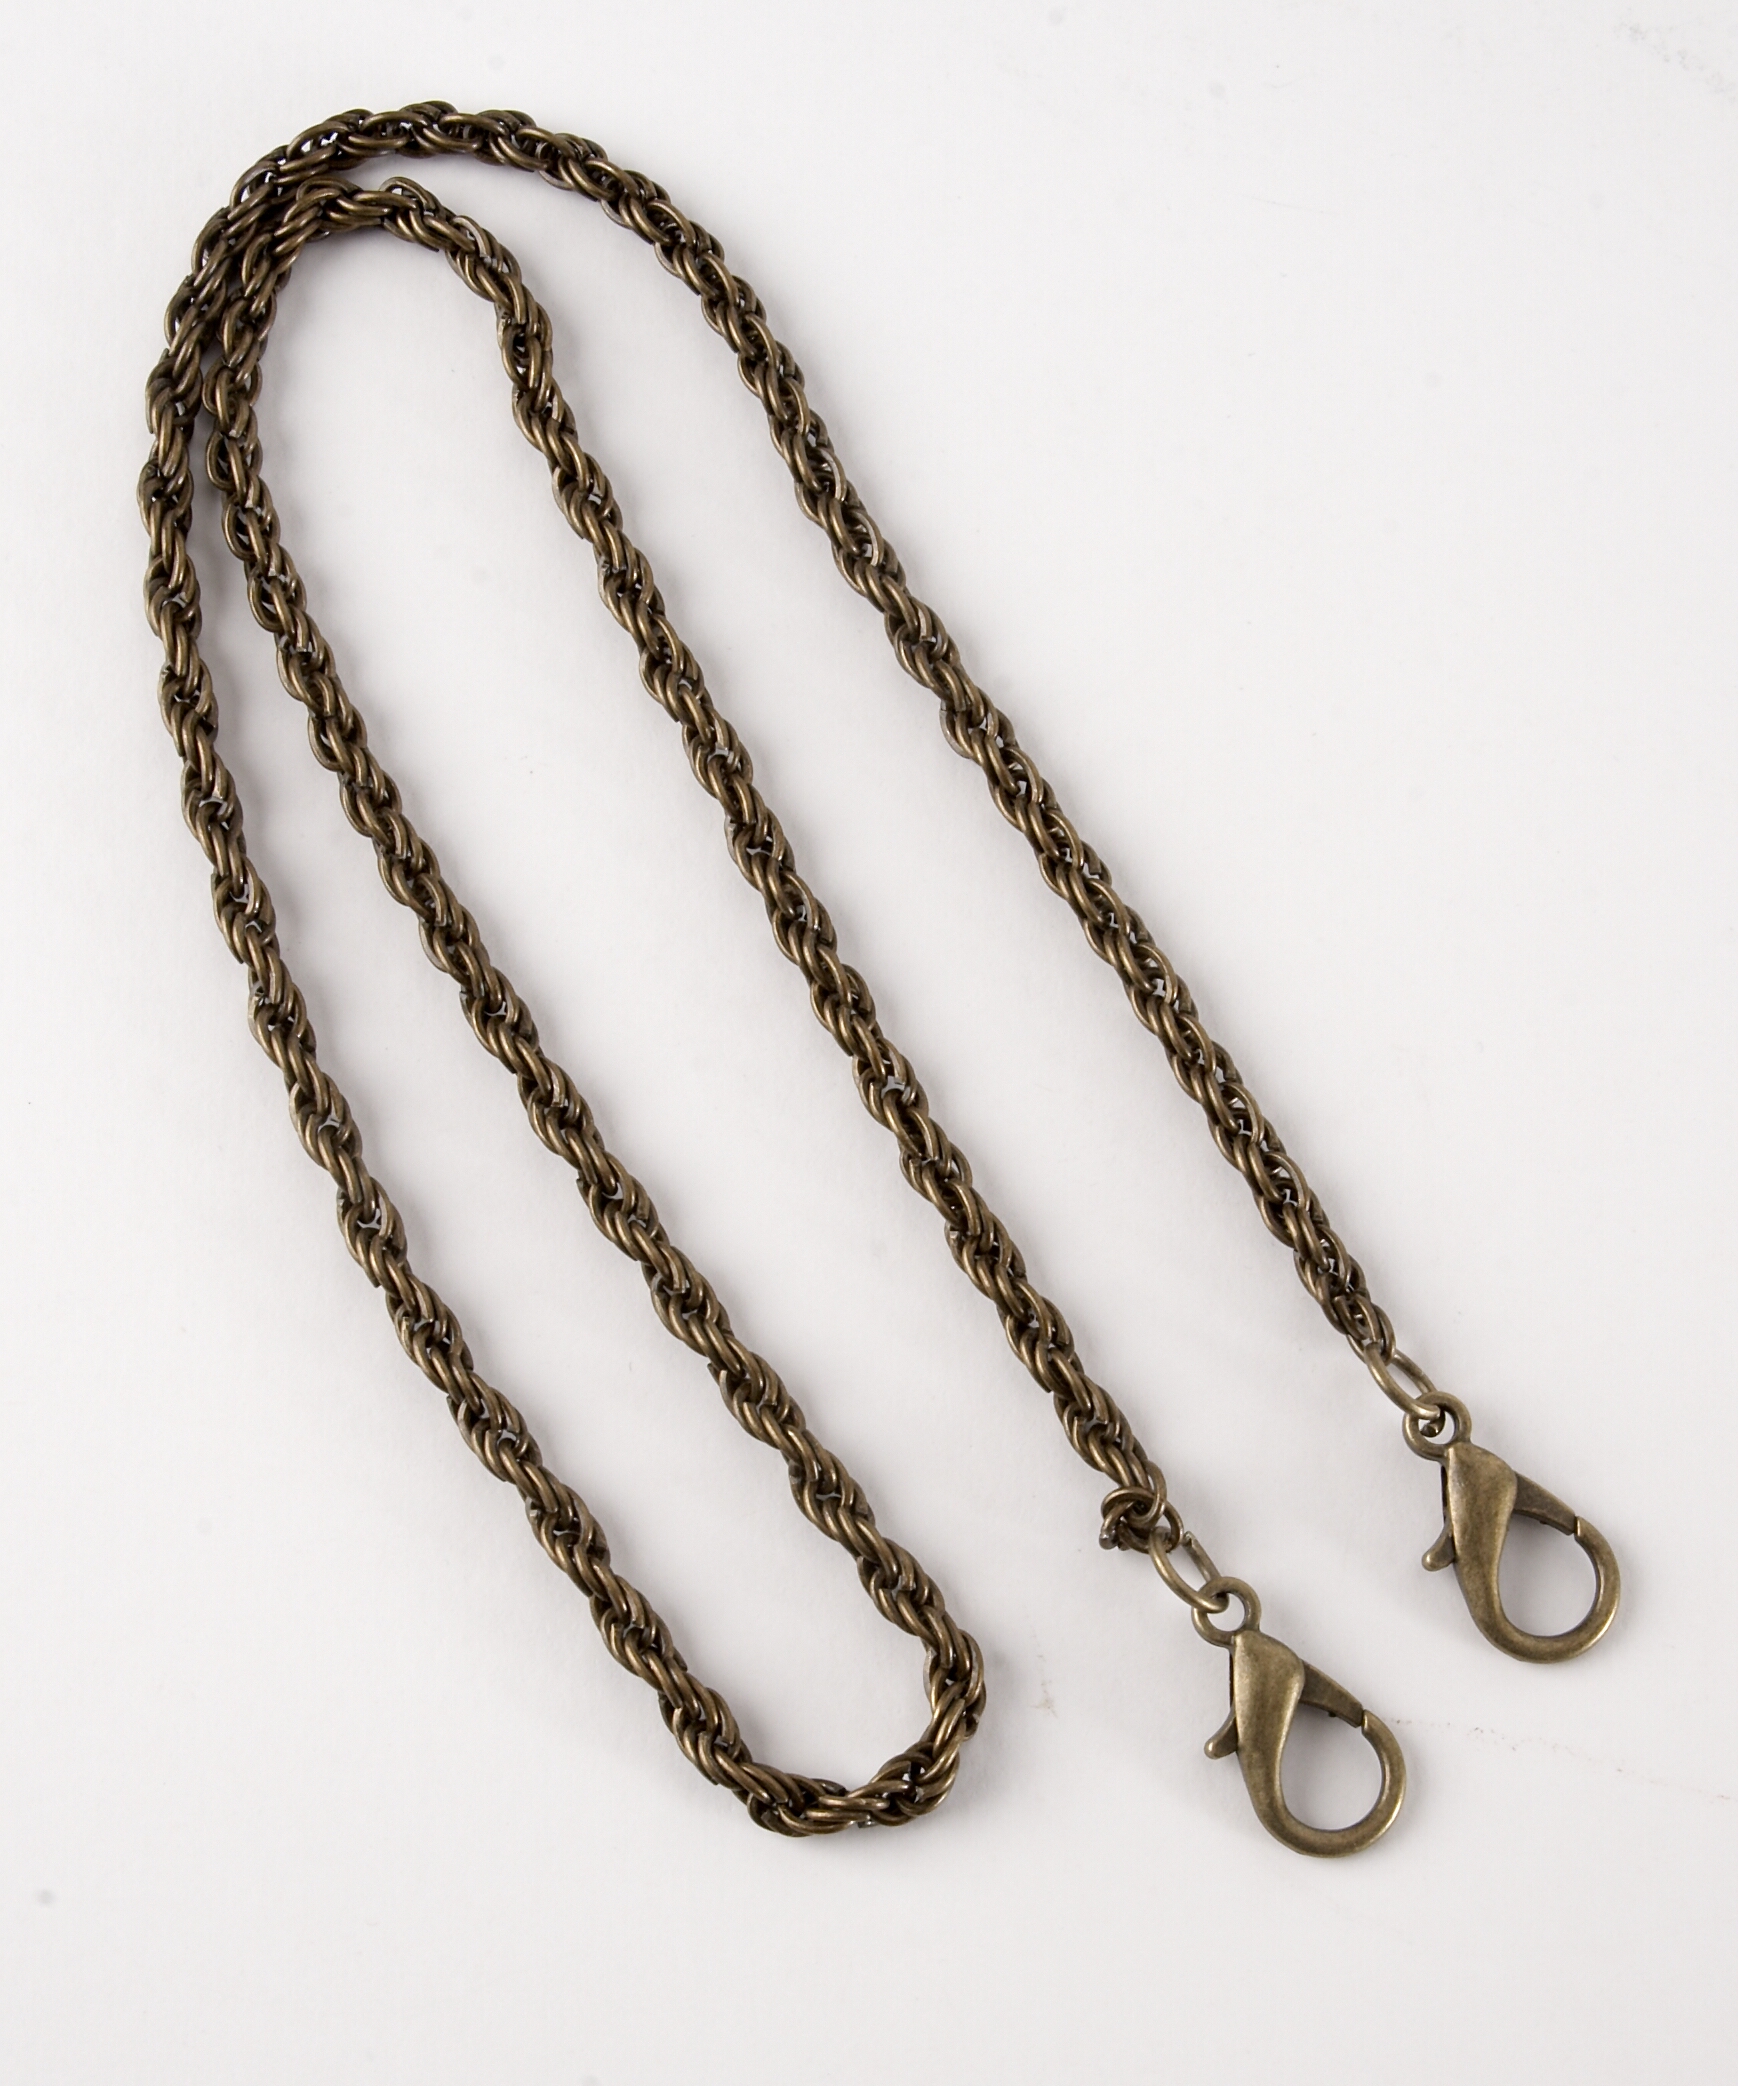 Metal Rope Chain Bag Strap - Antique Gold 60cm